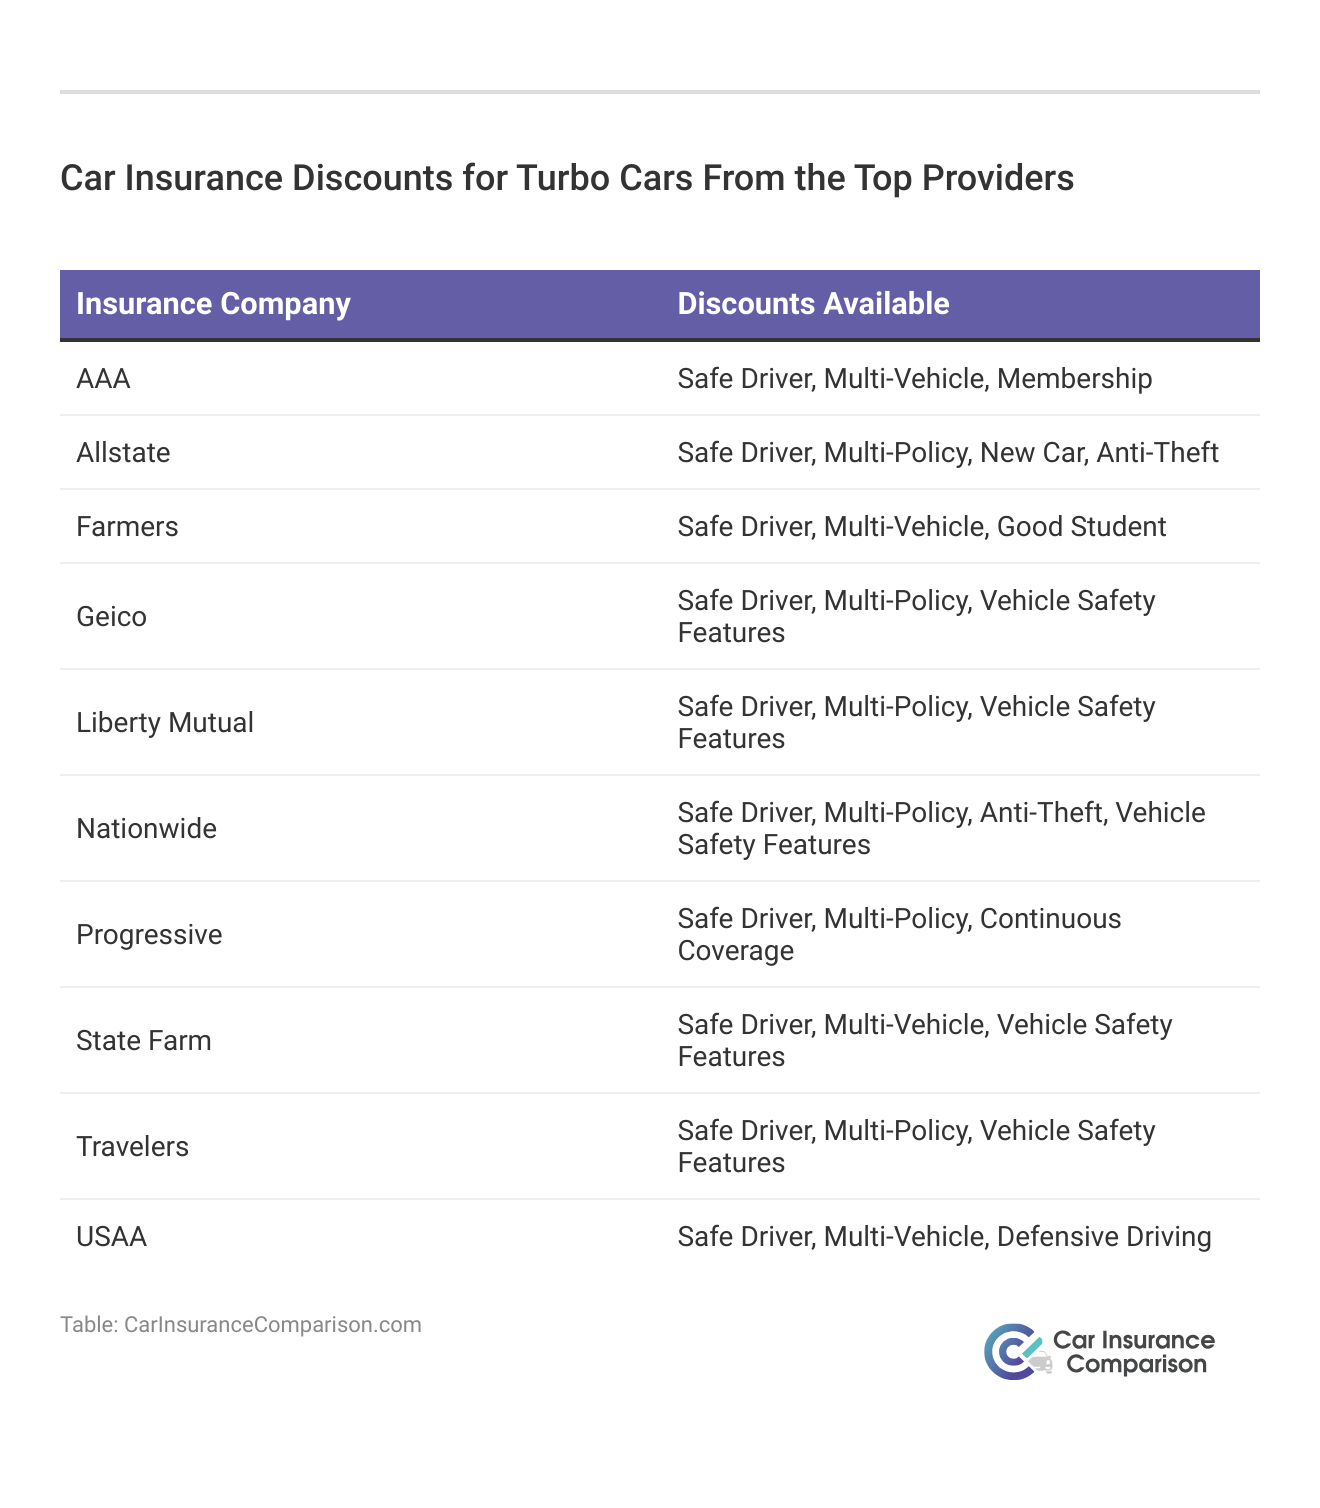 Car Insurance Discounts for Turbo Cars From the Top Providers